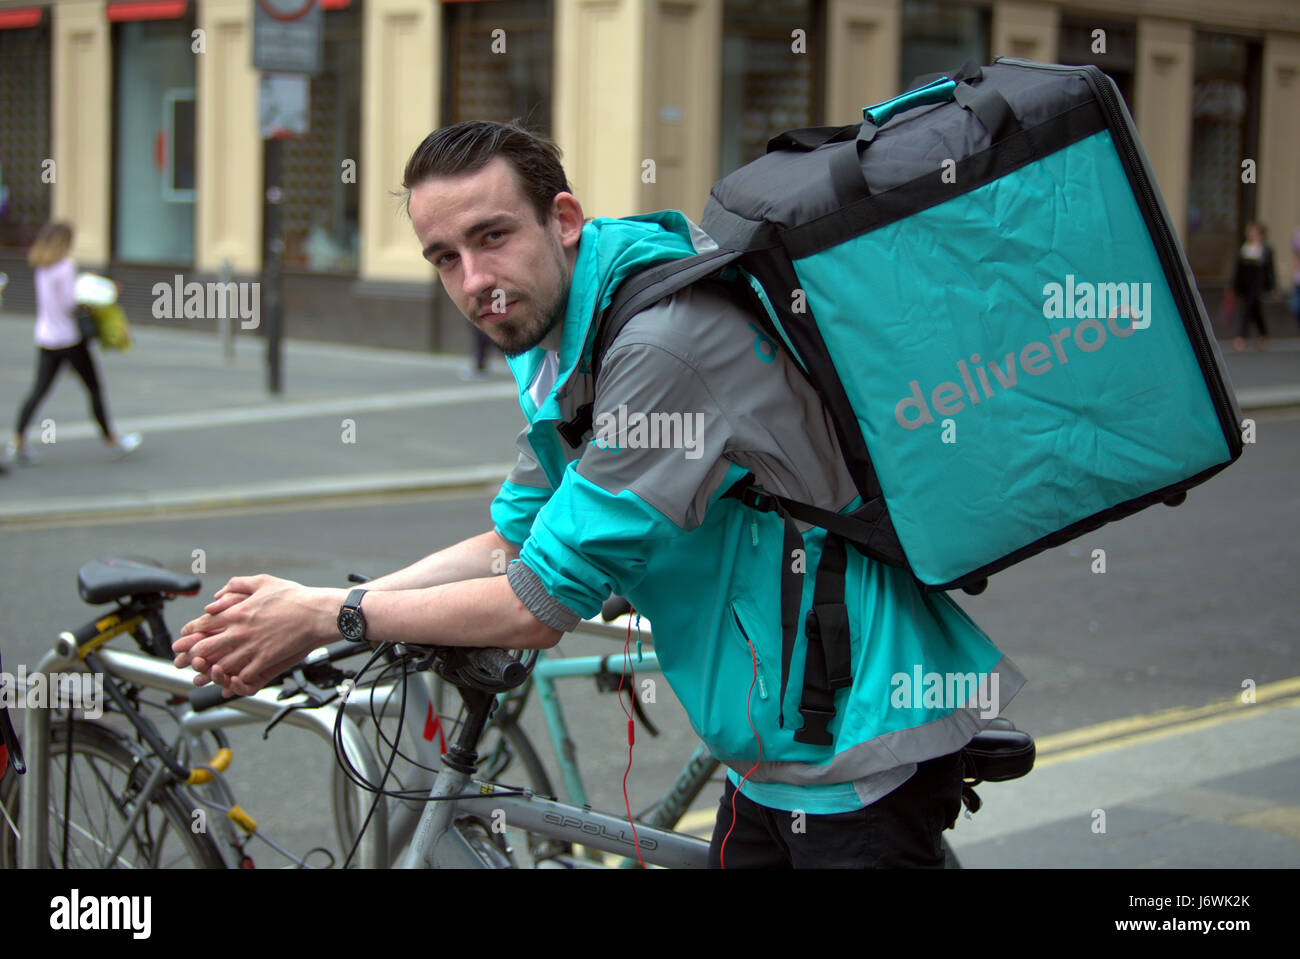 bicycle bike delivery Deliveroo man employee Stock Photo